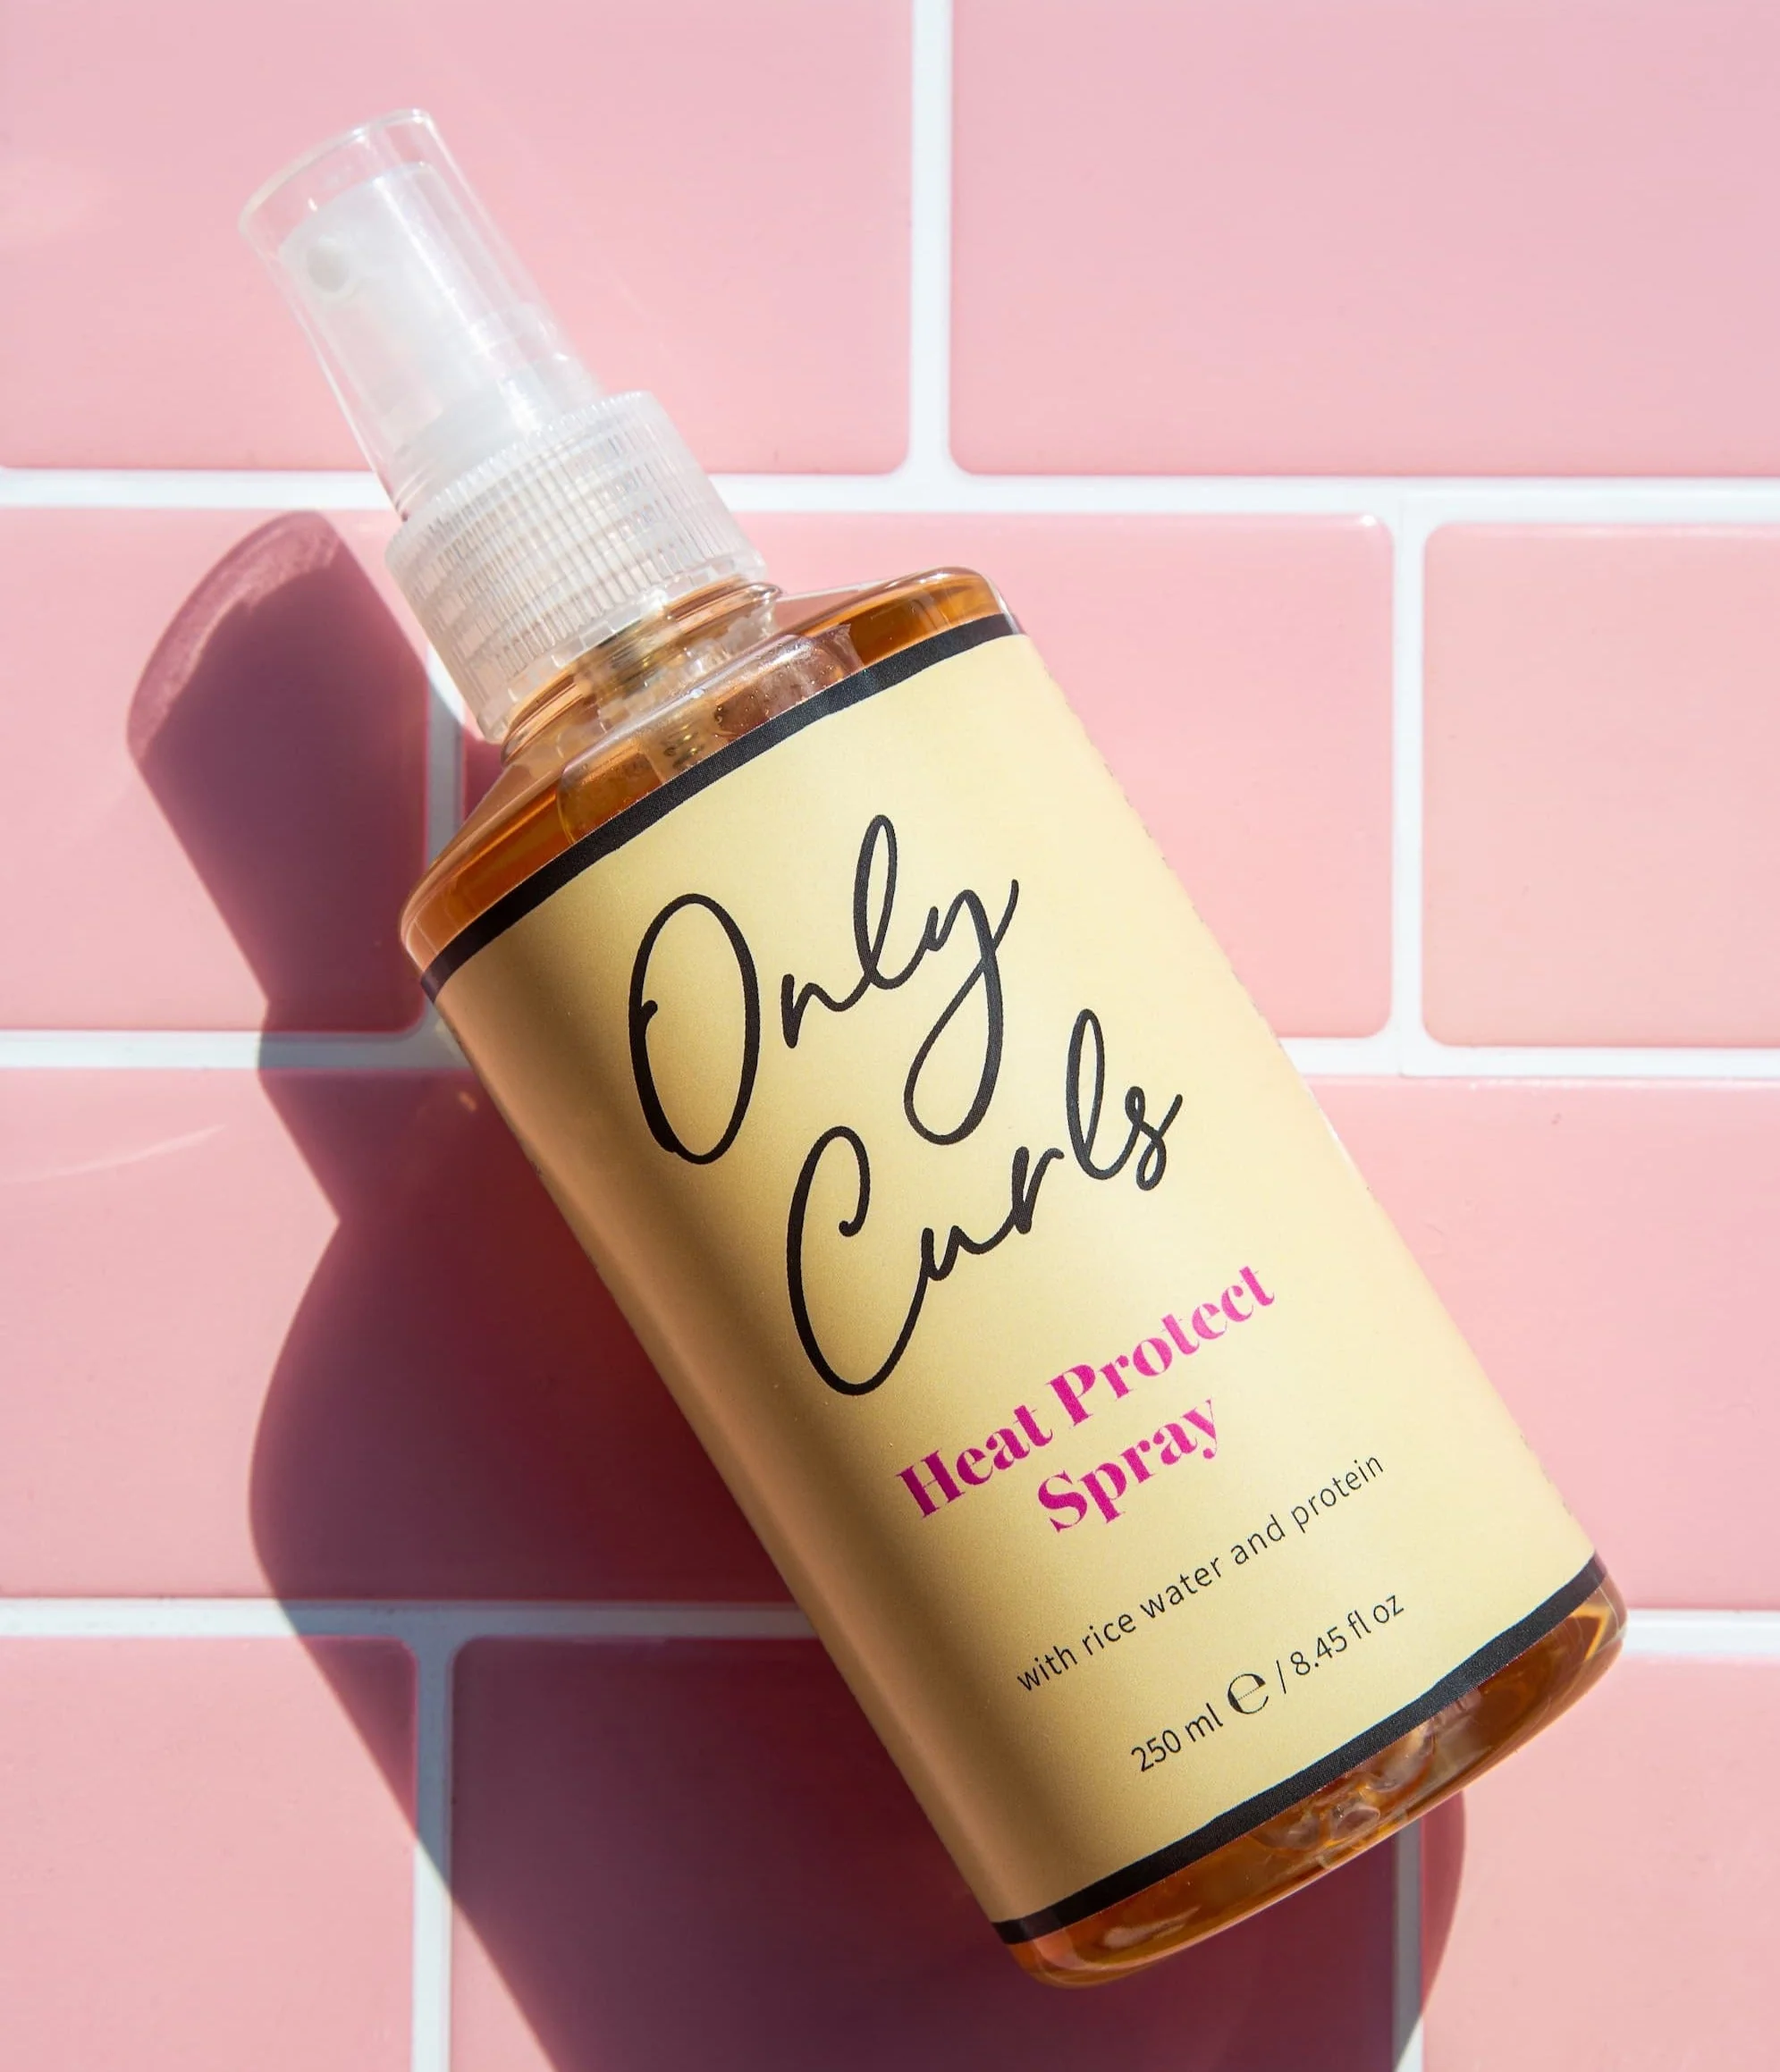 Only Curls Heat Protect Spray - Travel Size